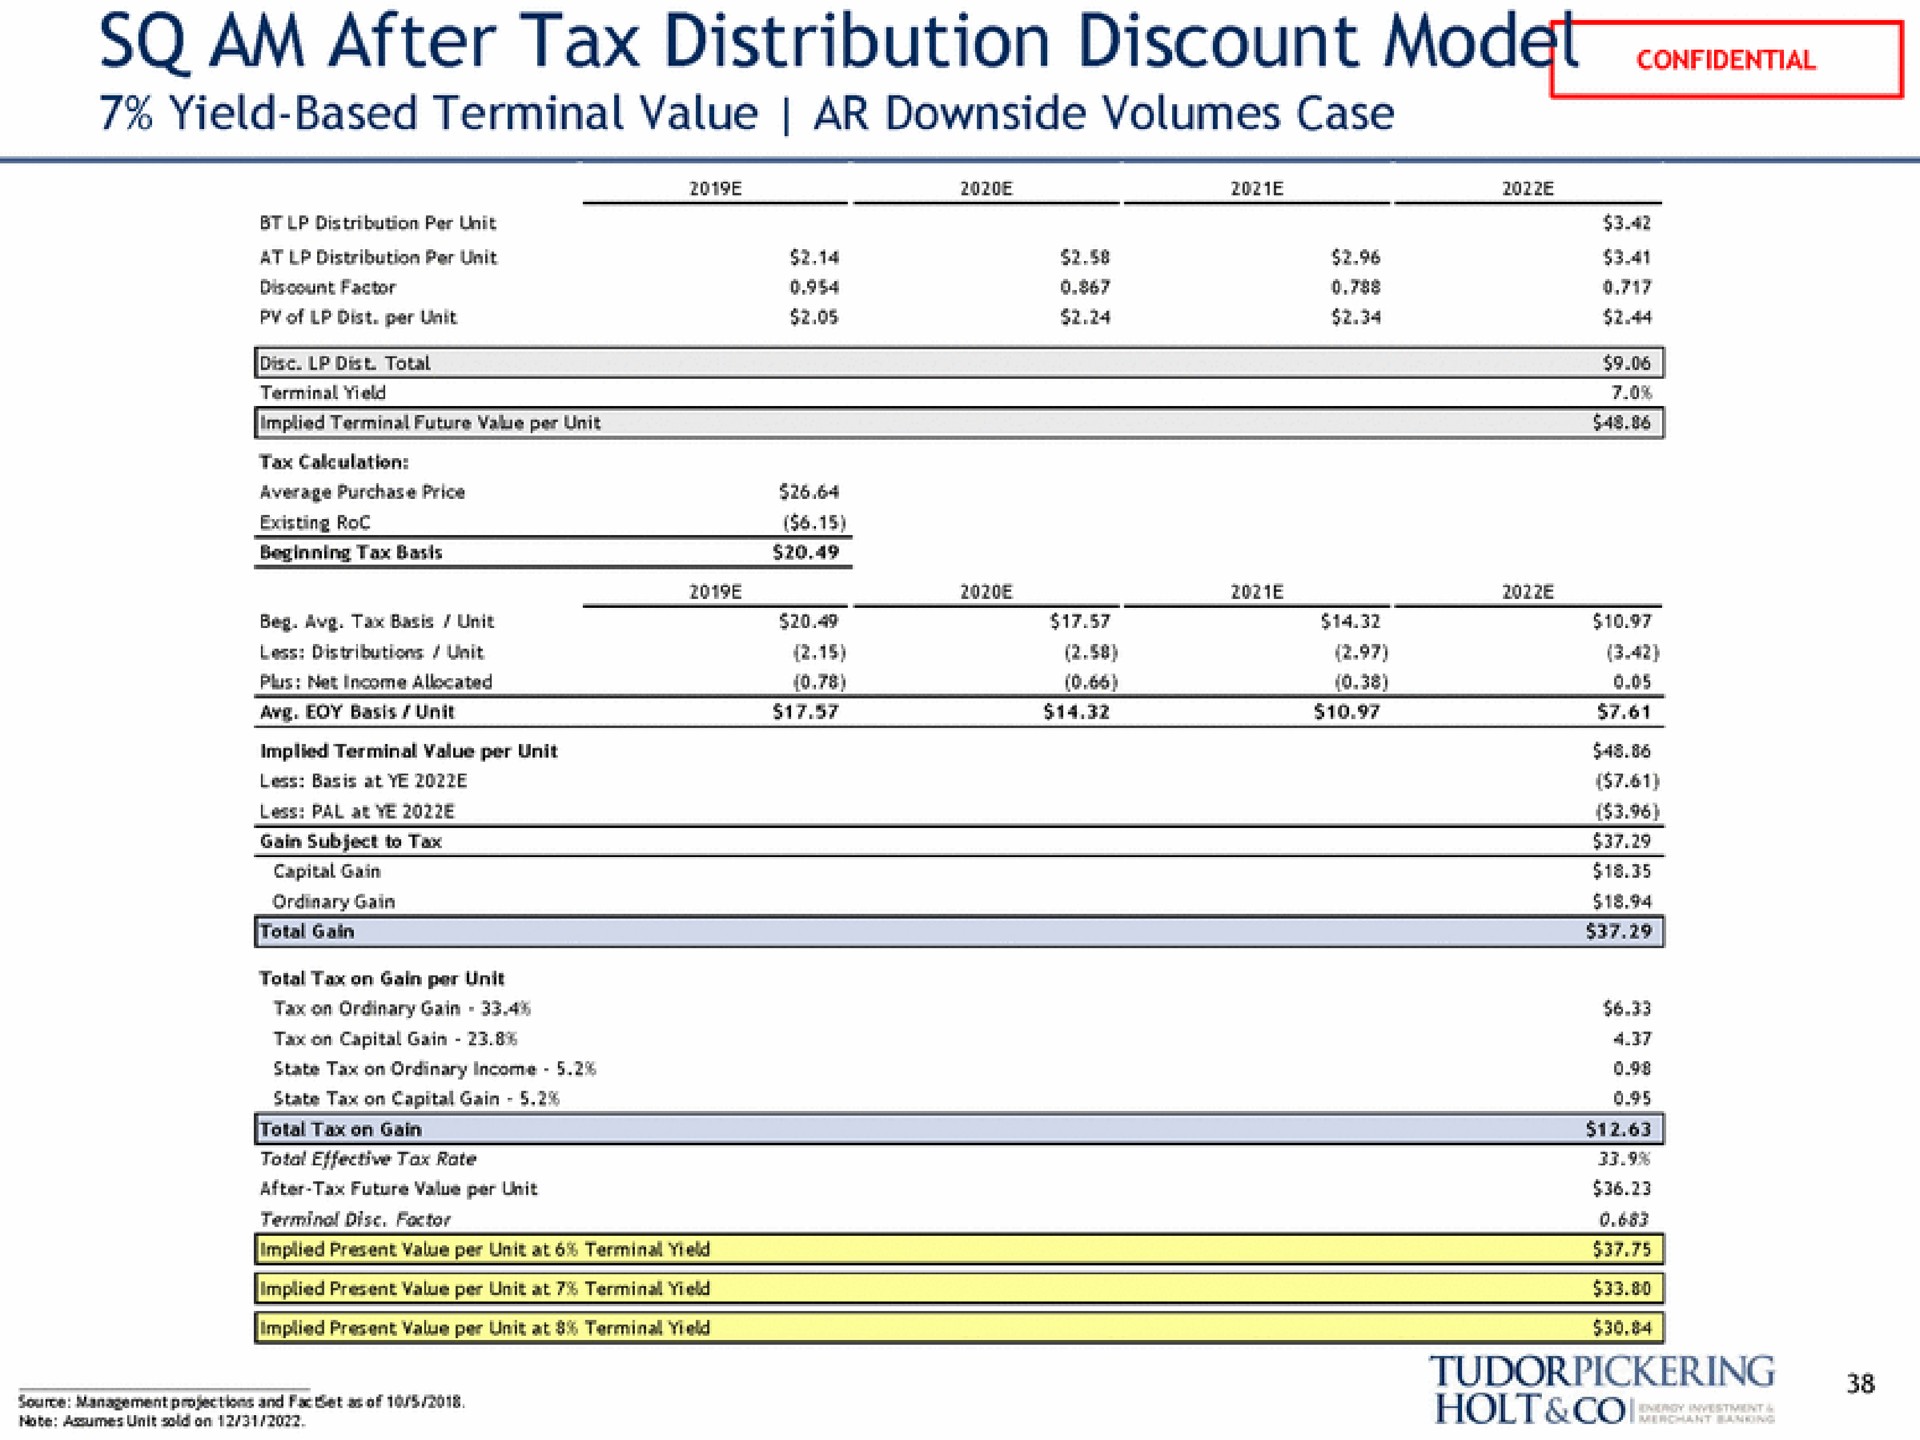 am after tax distribution discount yield based terminal value downside volumes case rile pan holt | Tudor, Pickering, Holt & Co